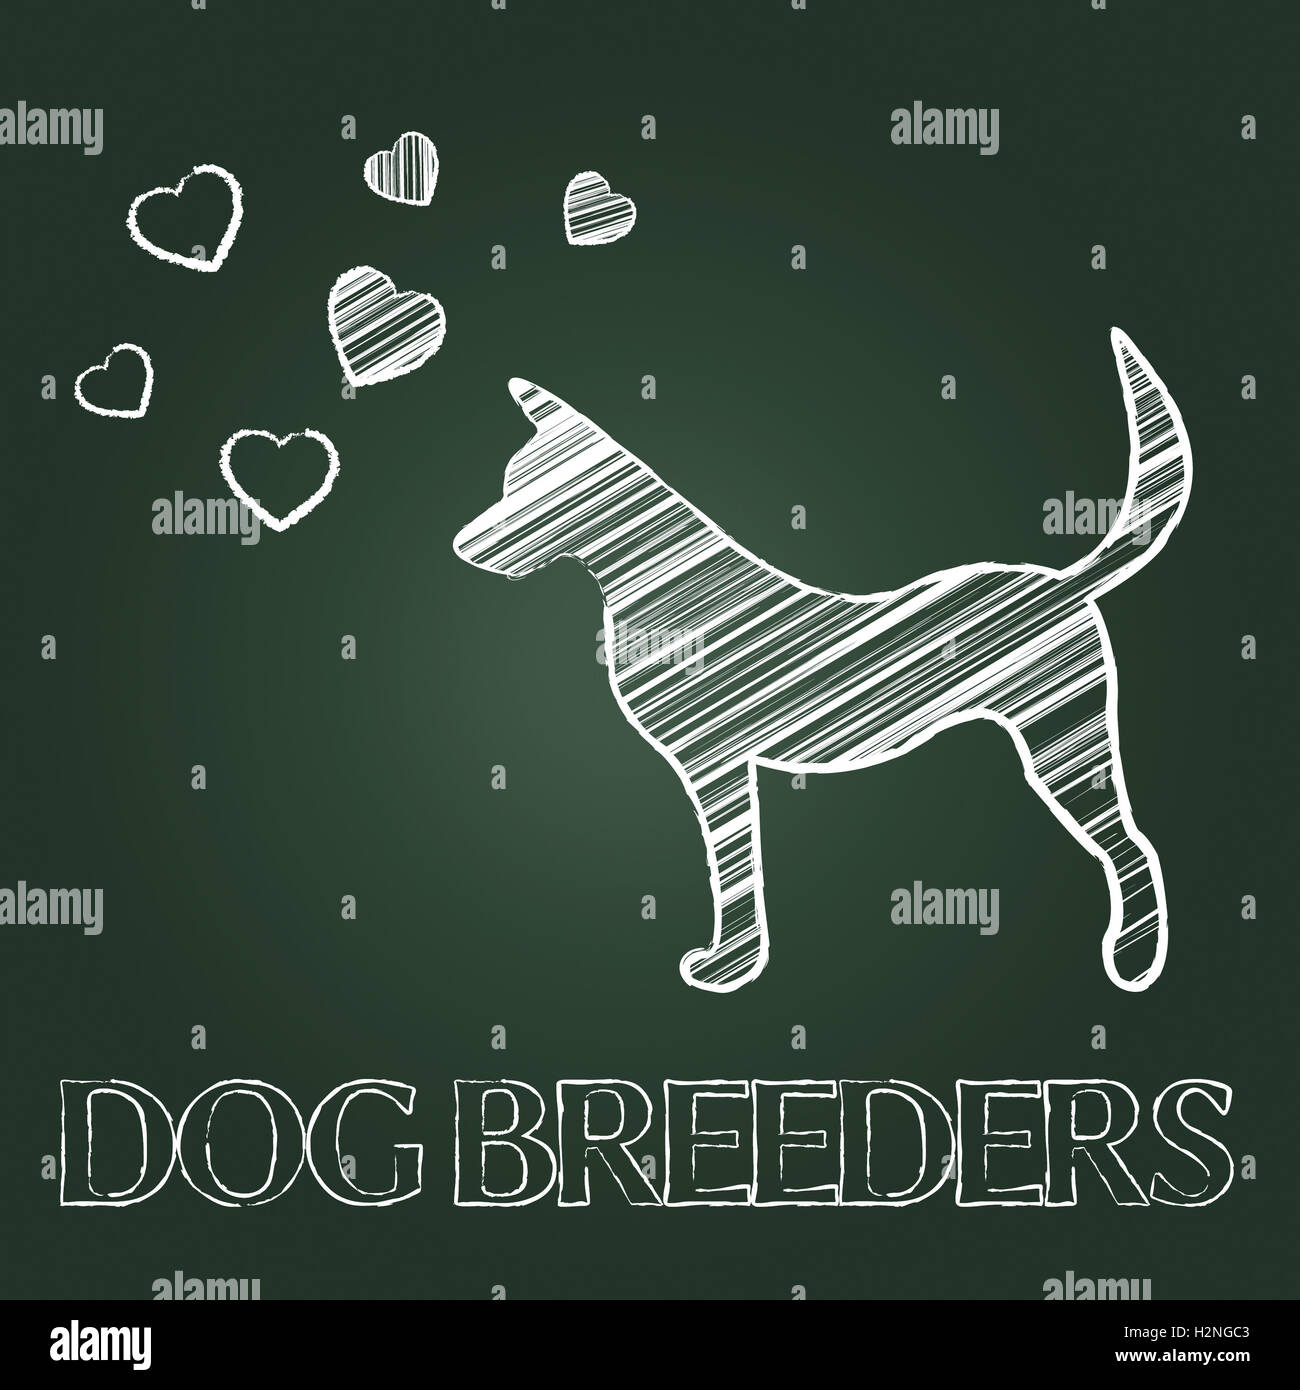 Dog Breeders Meaning Pedigree Breeding And Reproduce Stock Photo